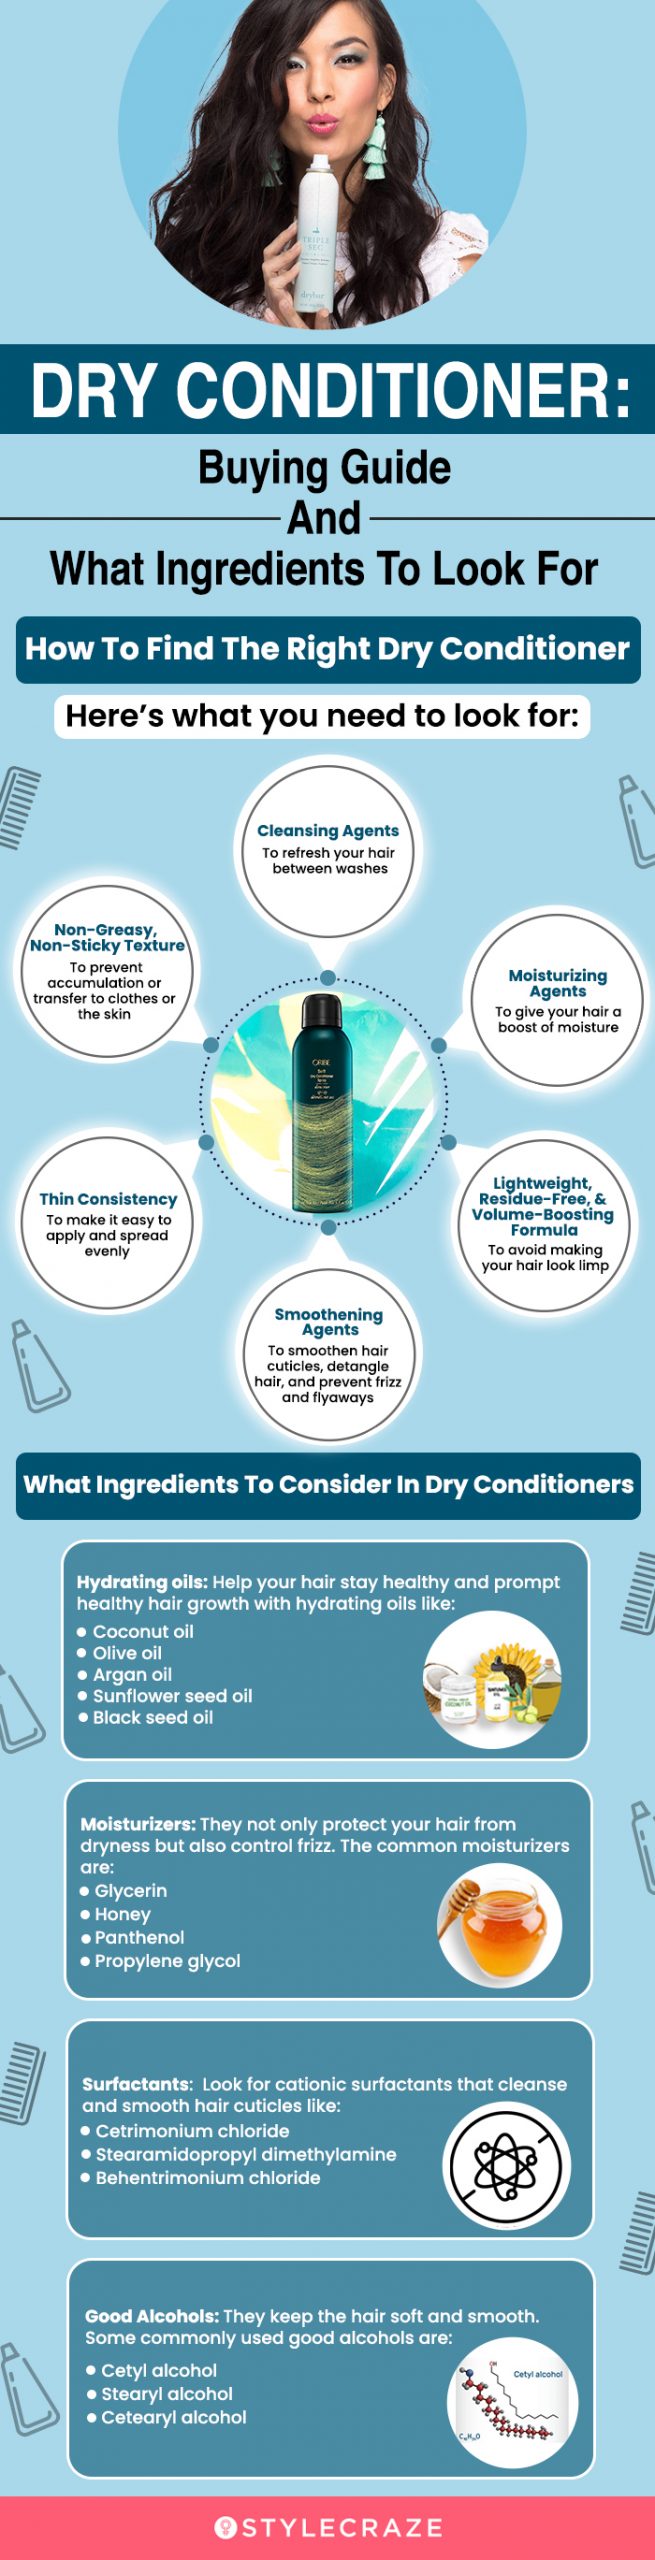 Dry Conditioner: Buying Guide And What Ingredients To Look For